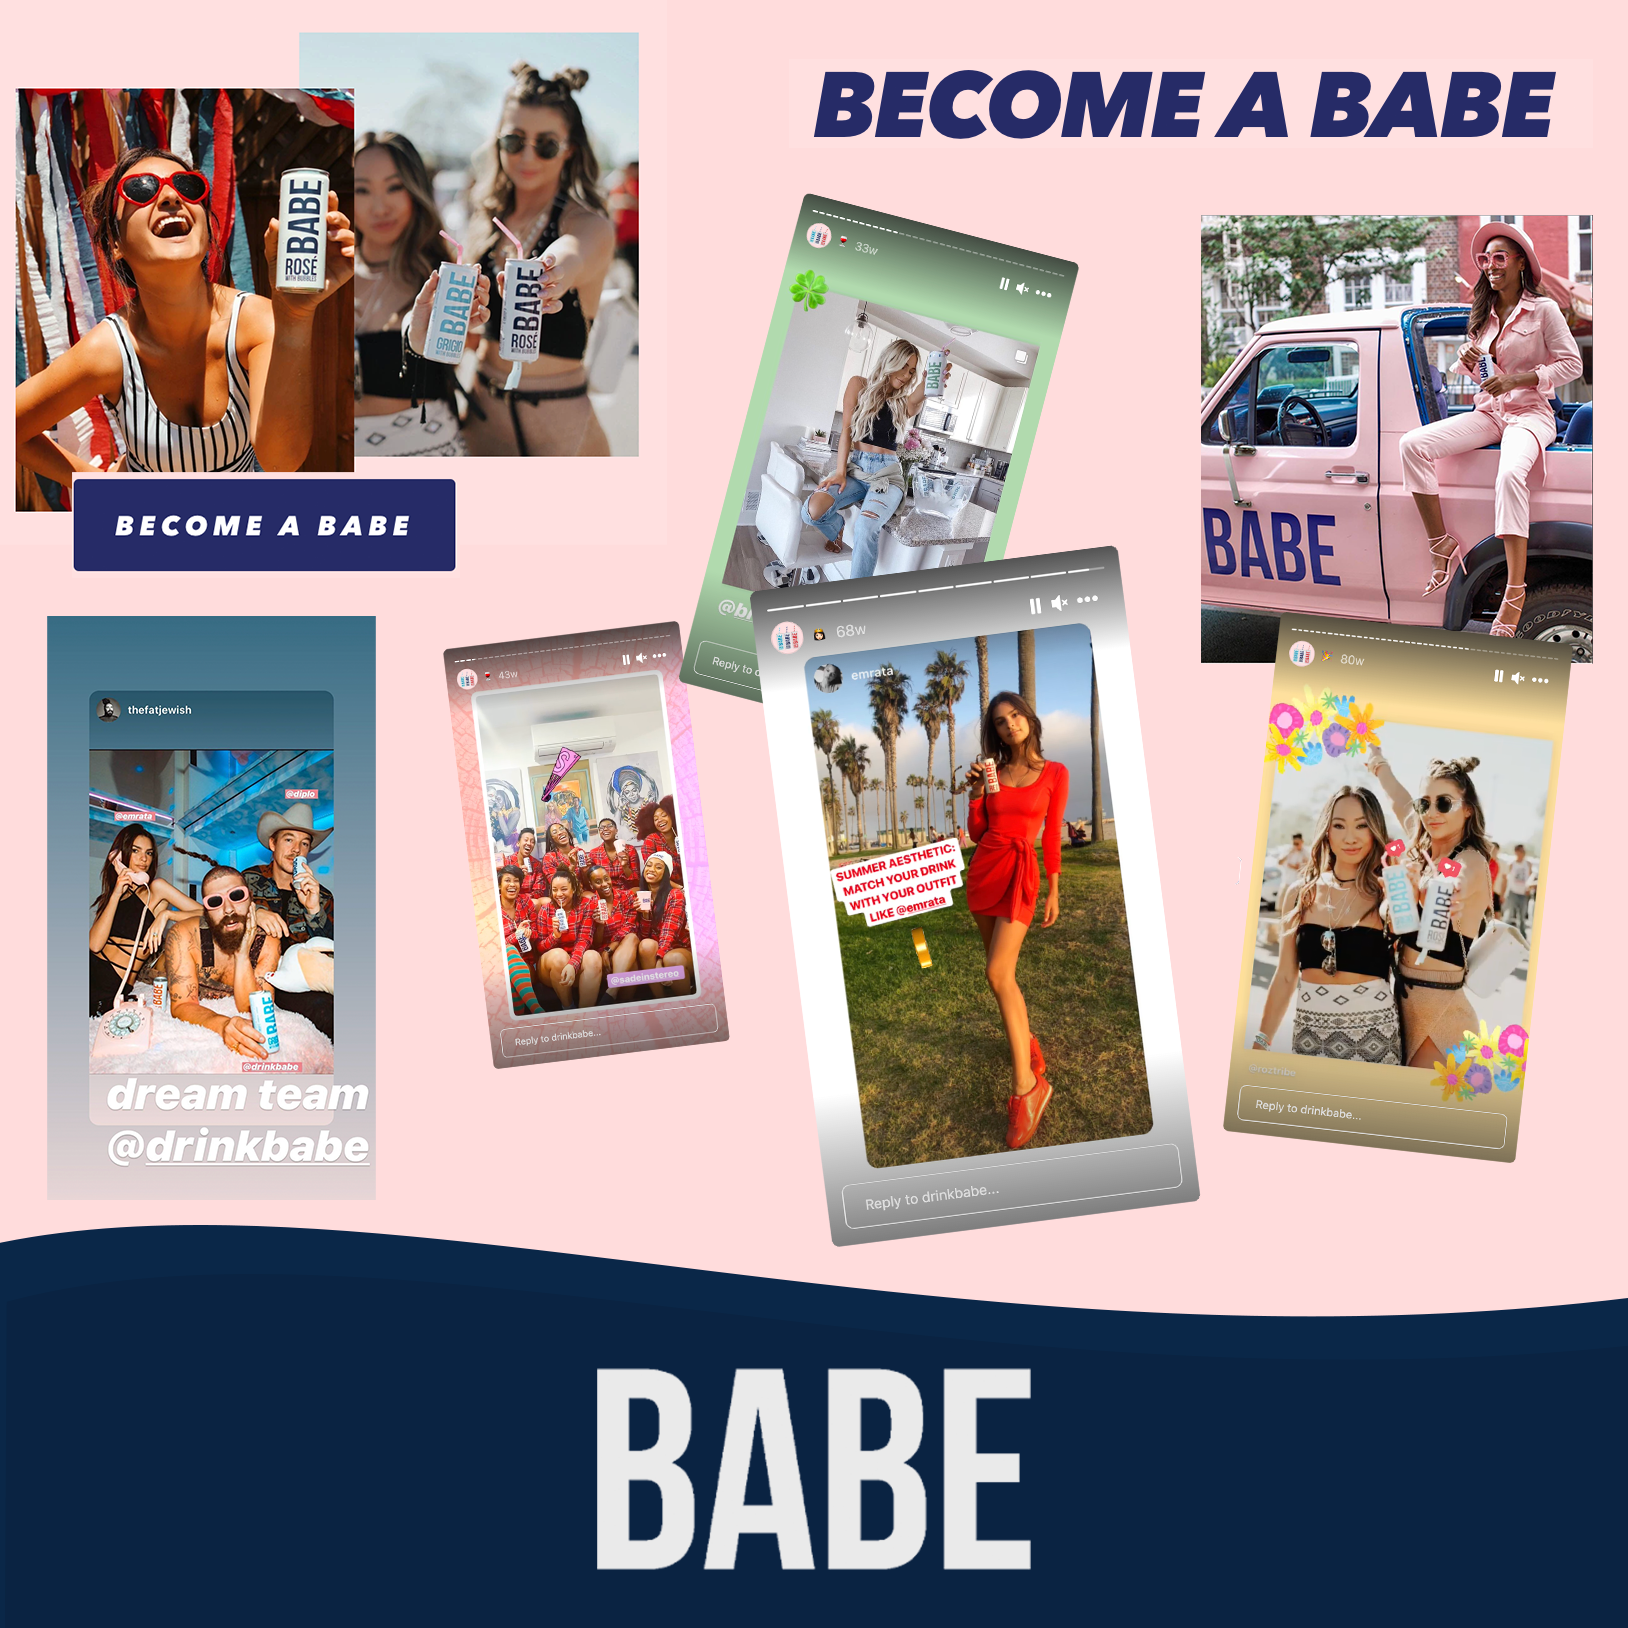 How BABE Wine Leveraged CreatorIQ’s Data Science & CRM to Successfully Scale Its ‘BABE Army’ Ambassador Program